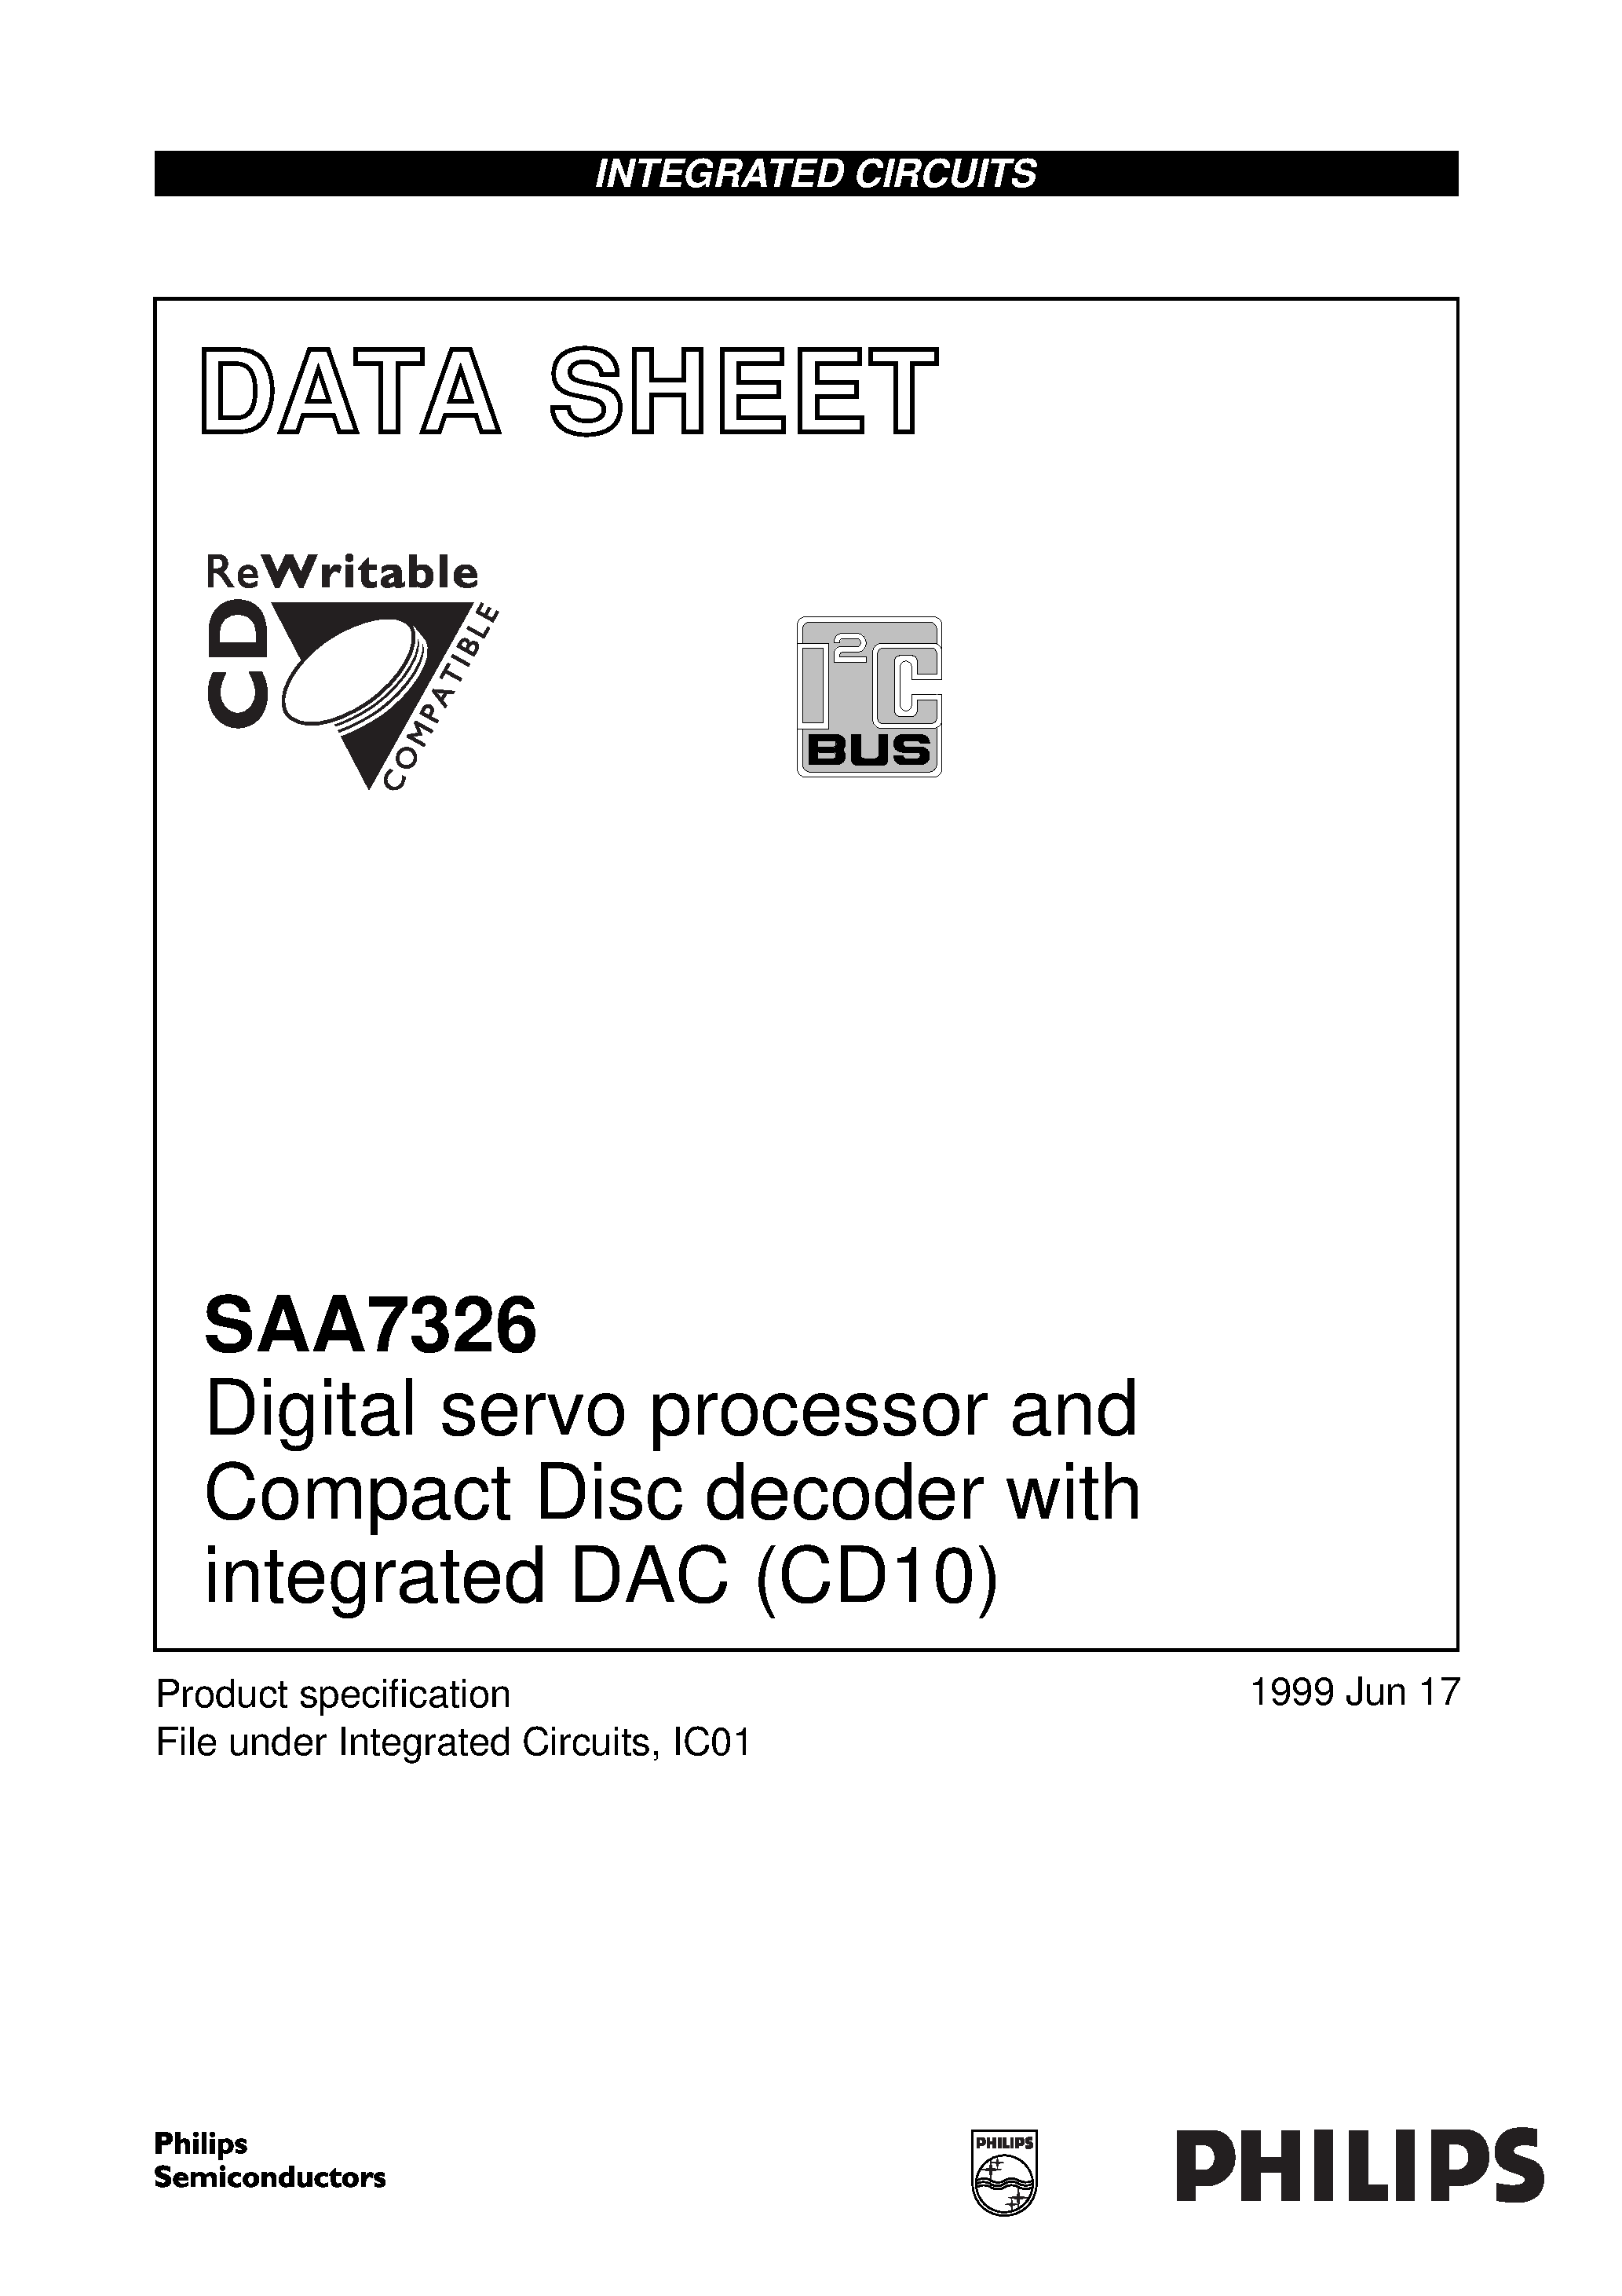 Datasheet SAA7326H - Digital servo processor and Compact Disc decoder with integrated DAC CD10 page 1